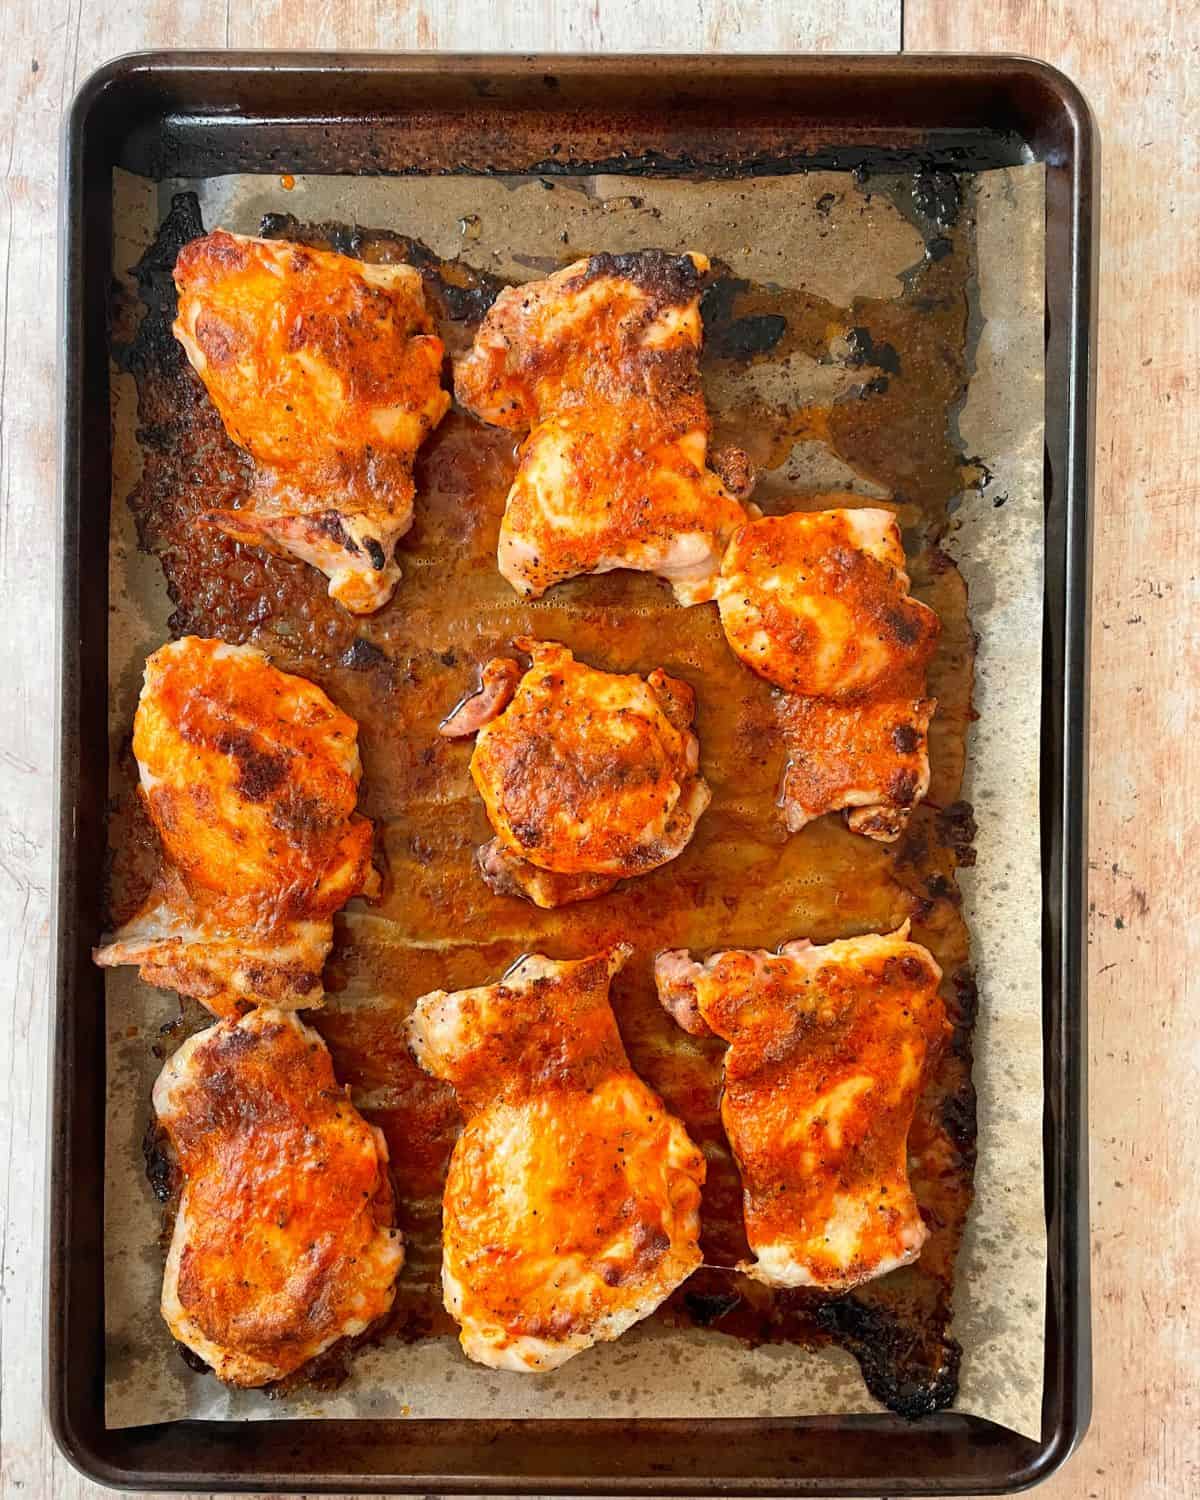 Baked and broiled Buffalo Chicken Thighs.